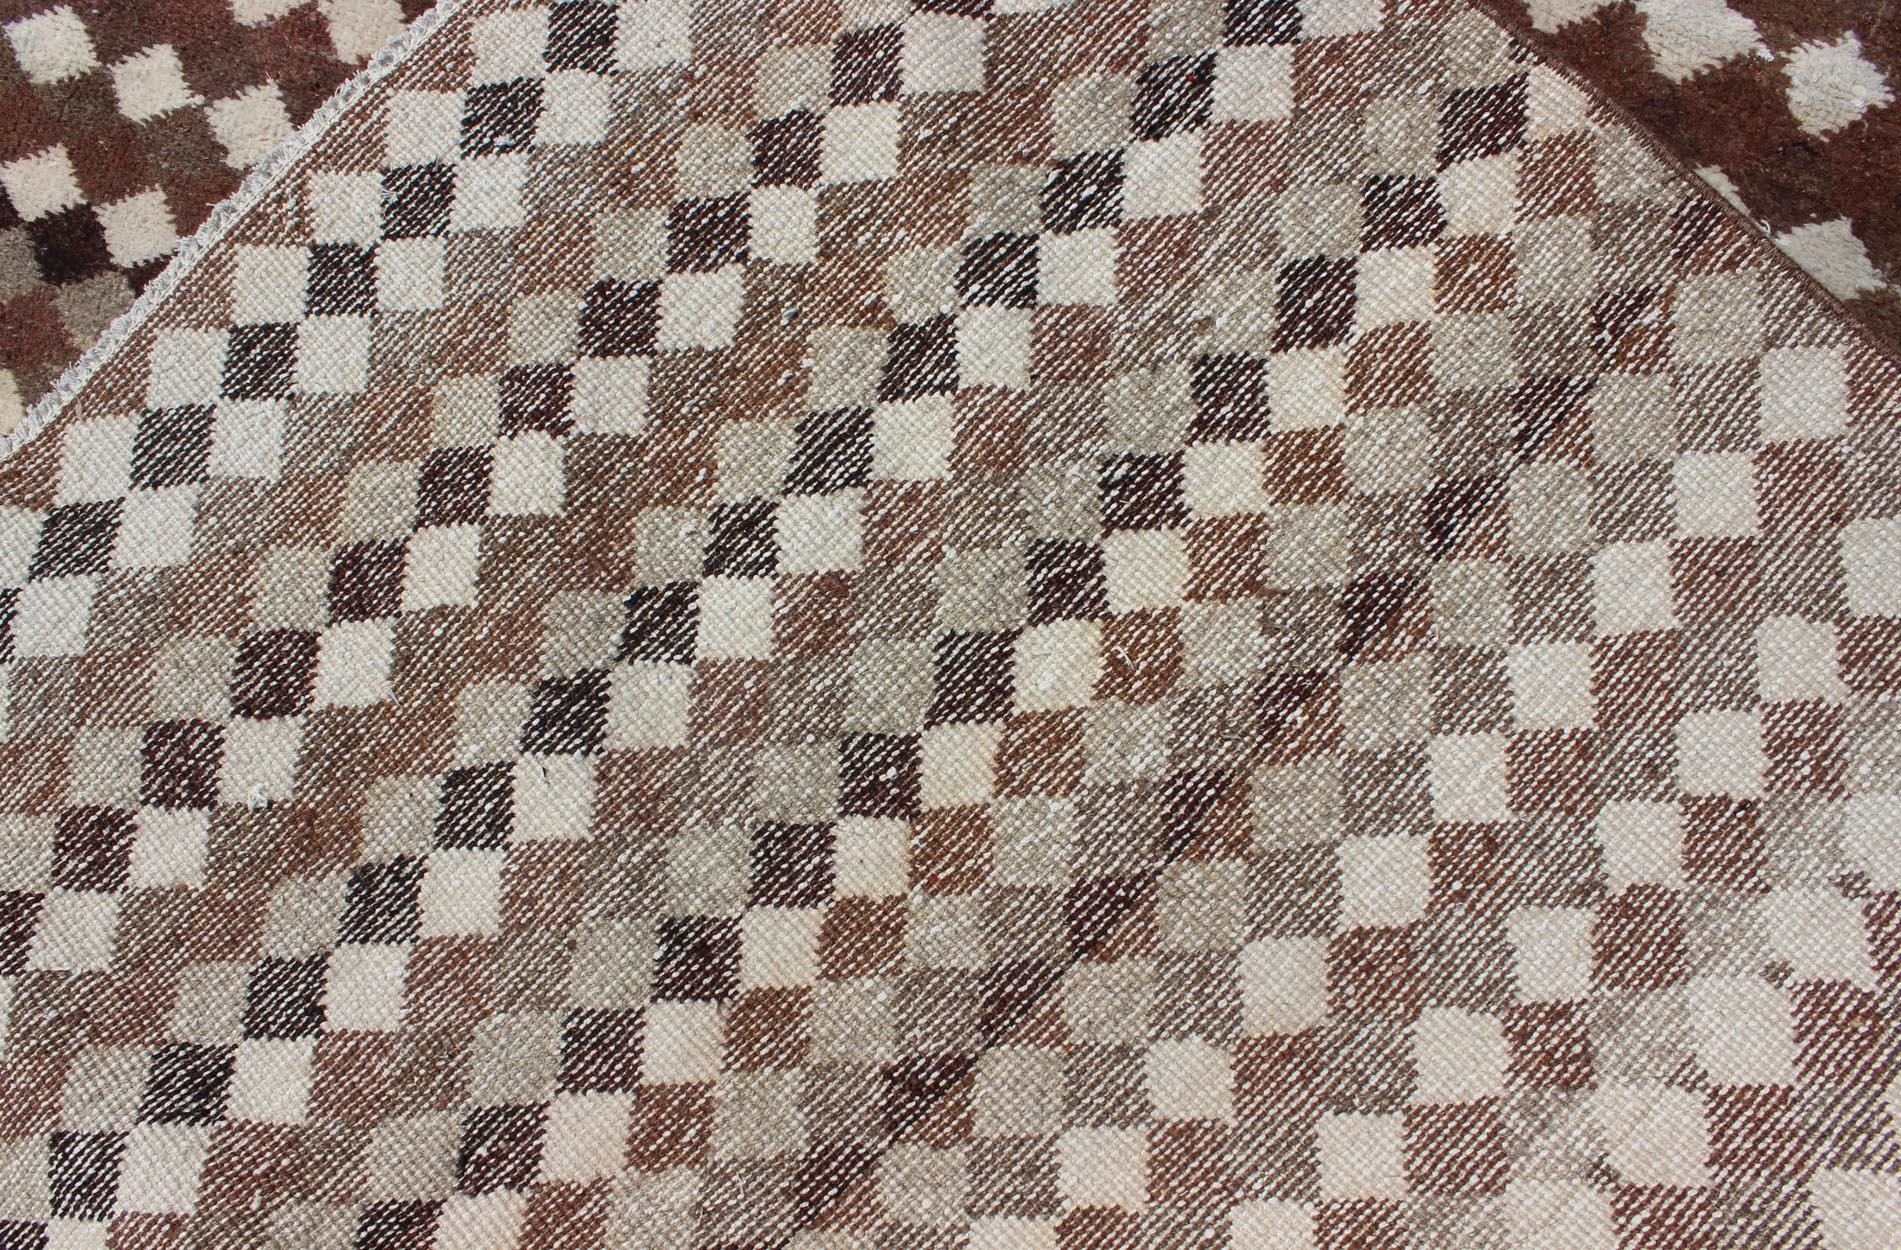 Mid-Century Modern Rug with All-Over Checkerboard Pattern in Multi Brown Tones For Sale 4